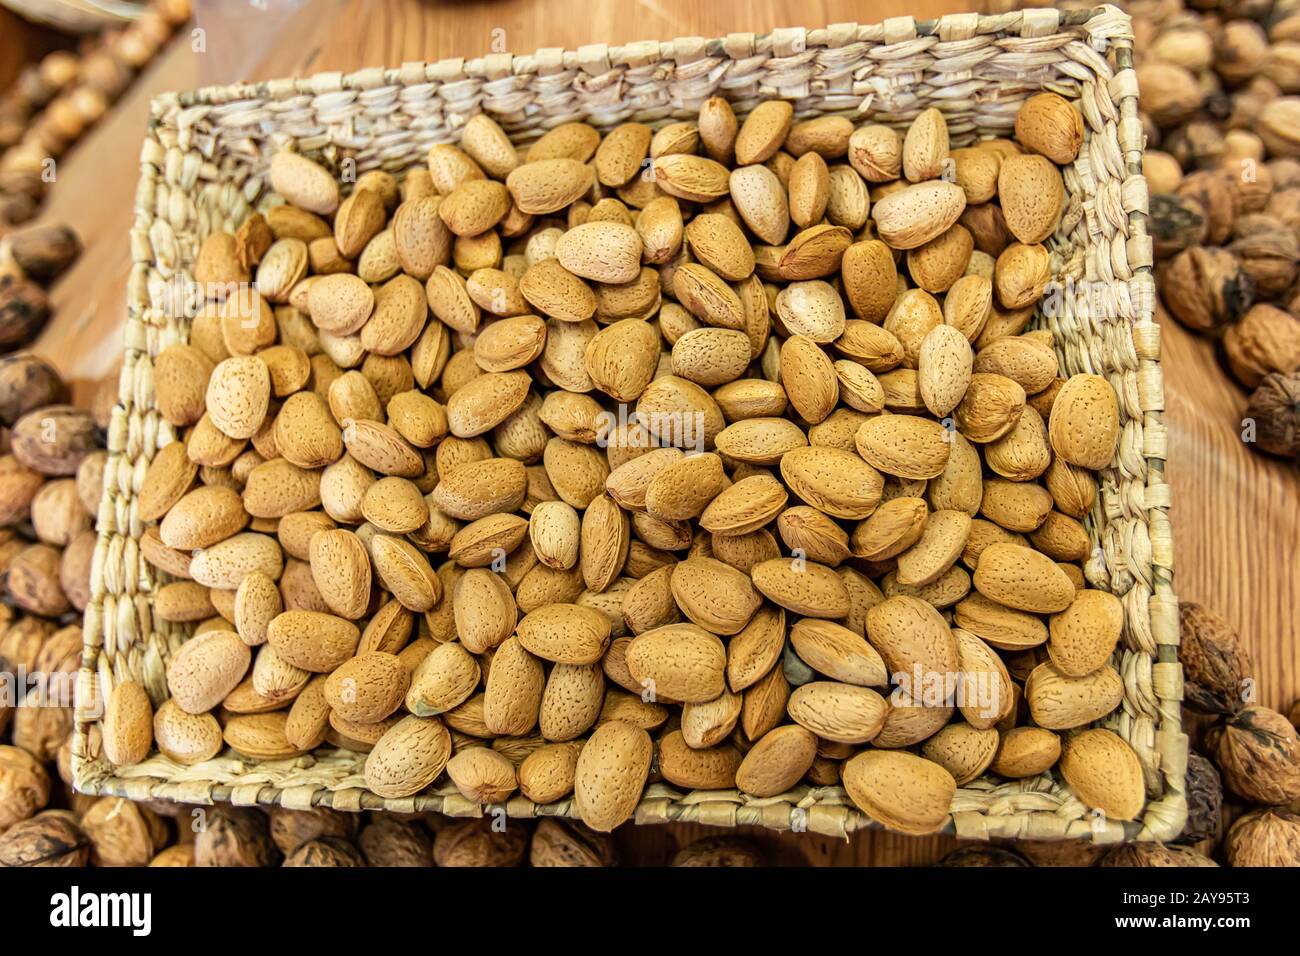 Close up of a basket of fresh, peeled almonds on sale at the local food market. Other dried fruits in the blurred background. Healthy snacks. Stock Photo